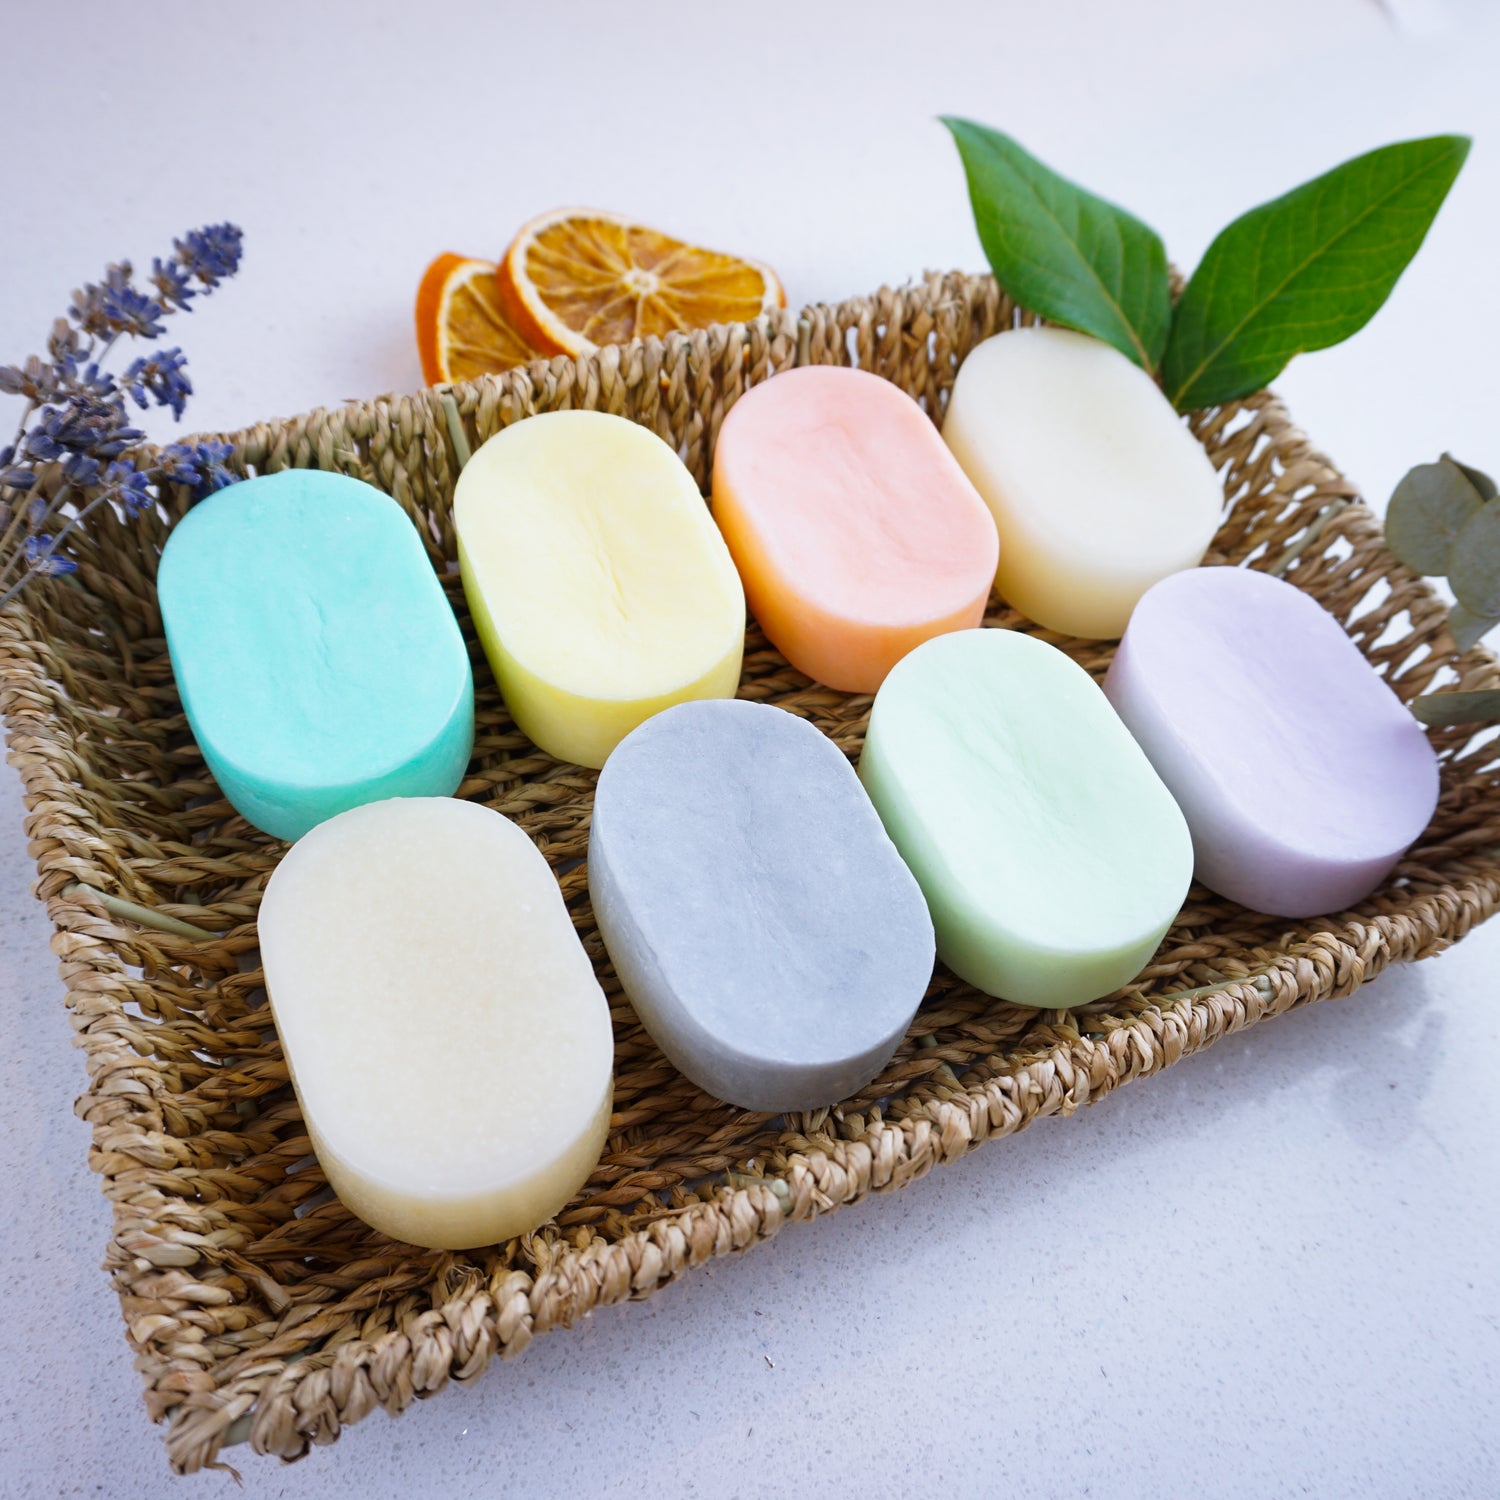 shampoo and conditioner bars sitting on a bamboo tray